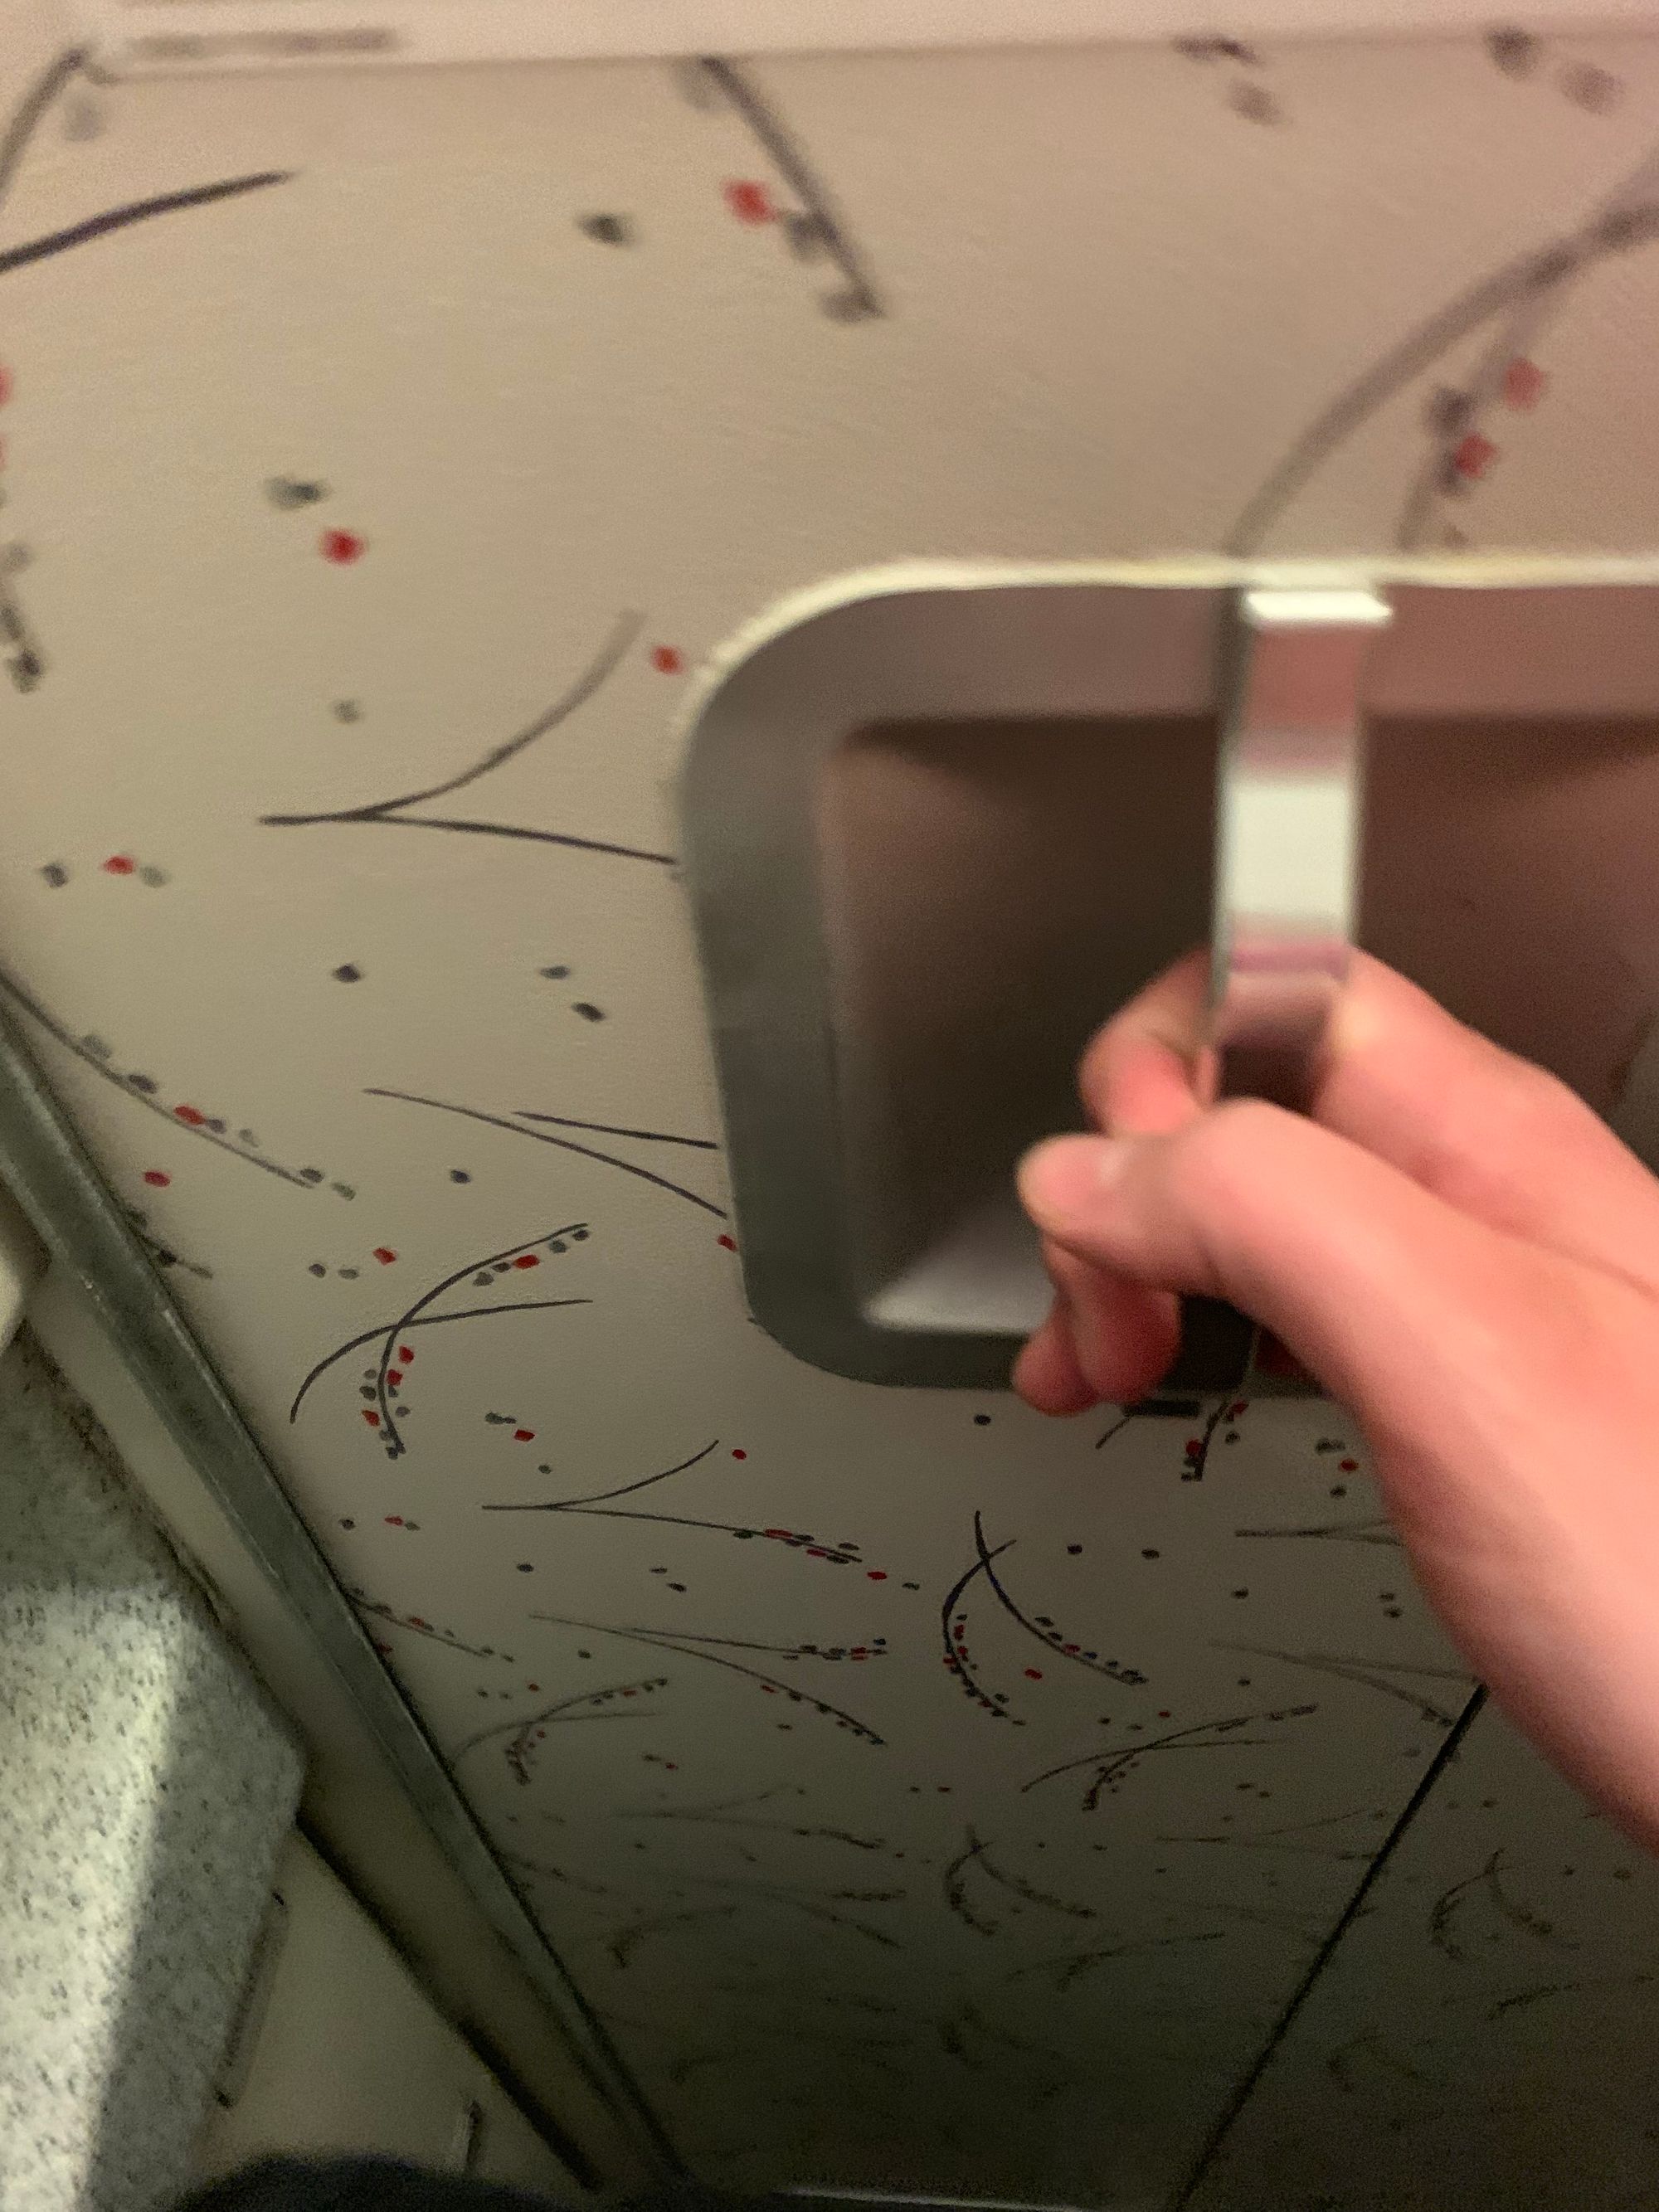 How to Change a Diaper in an Airplane Bathroom